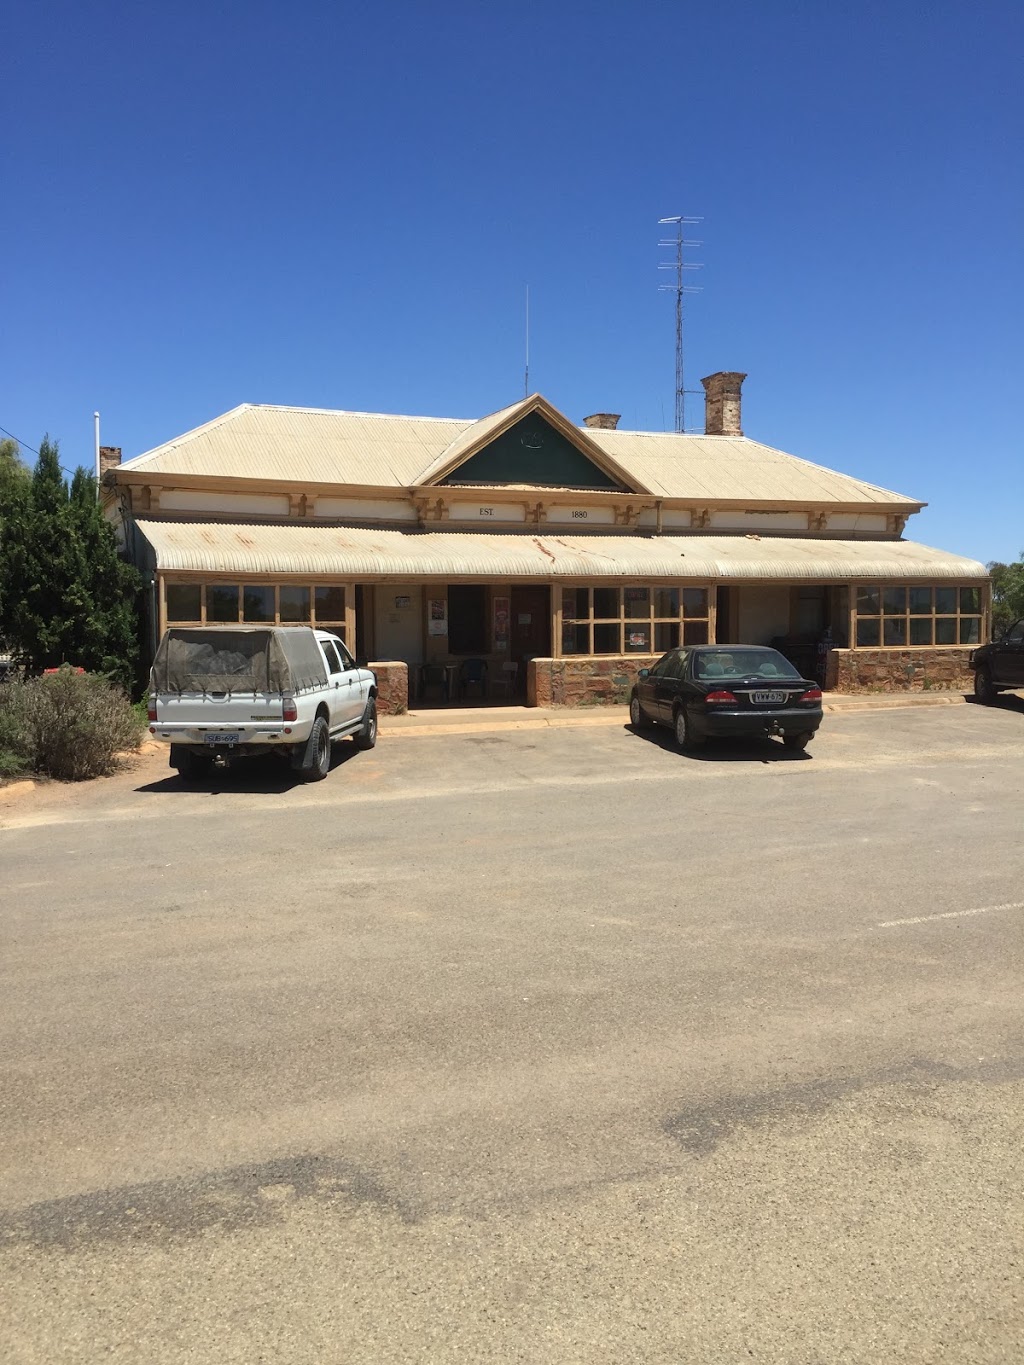 Yarcowie Hotel | Second St, Whyte Yarcowie, SA 5420, Whyte Yarcowie SA 5420, Australia | Phone: (08) 8659 1131